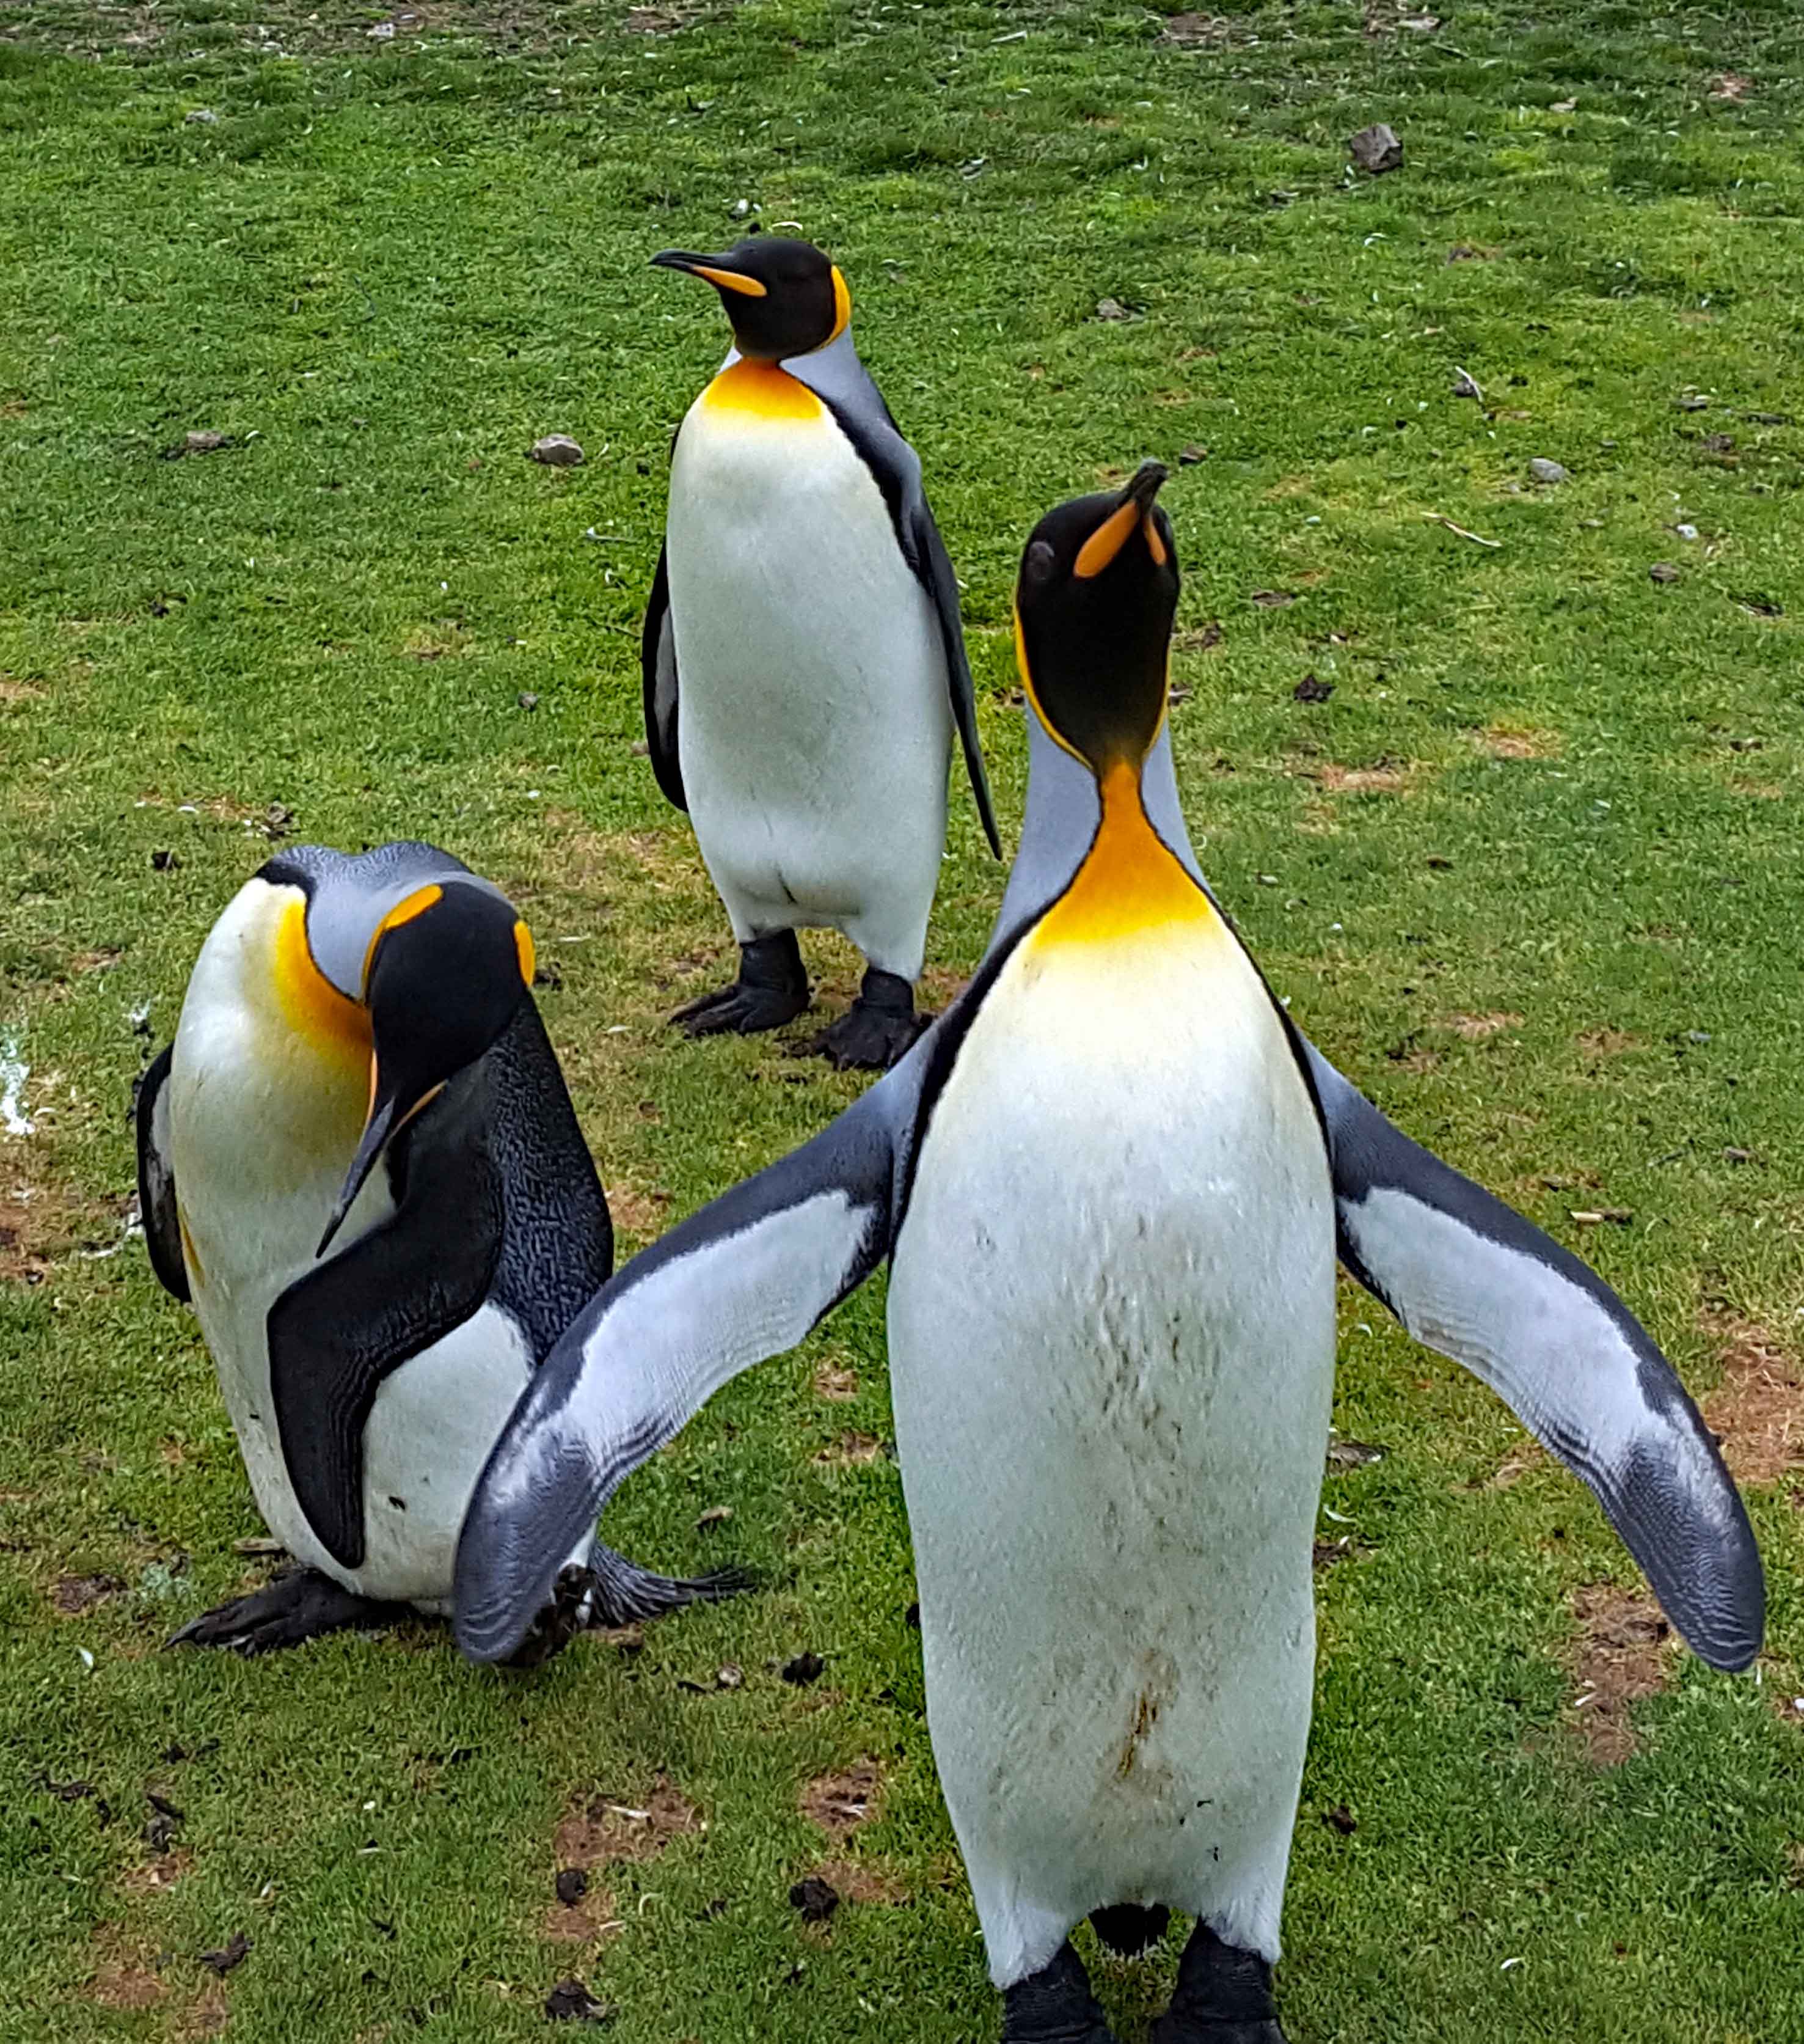 Preening & Wing-flapping are part of the King Penguins Rituals